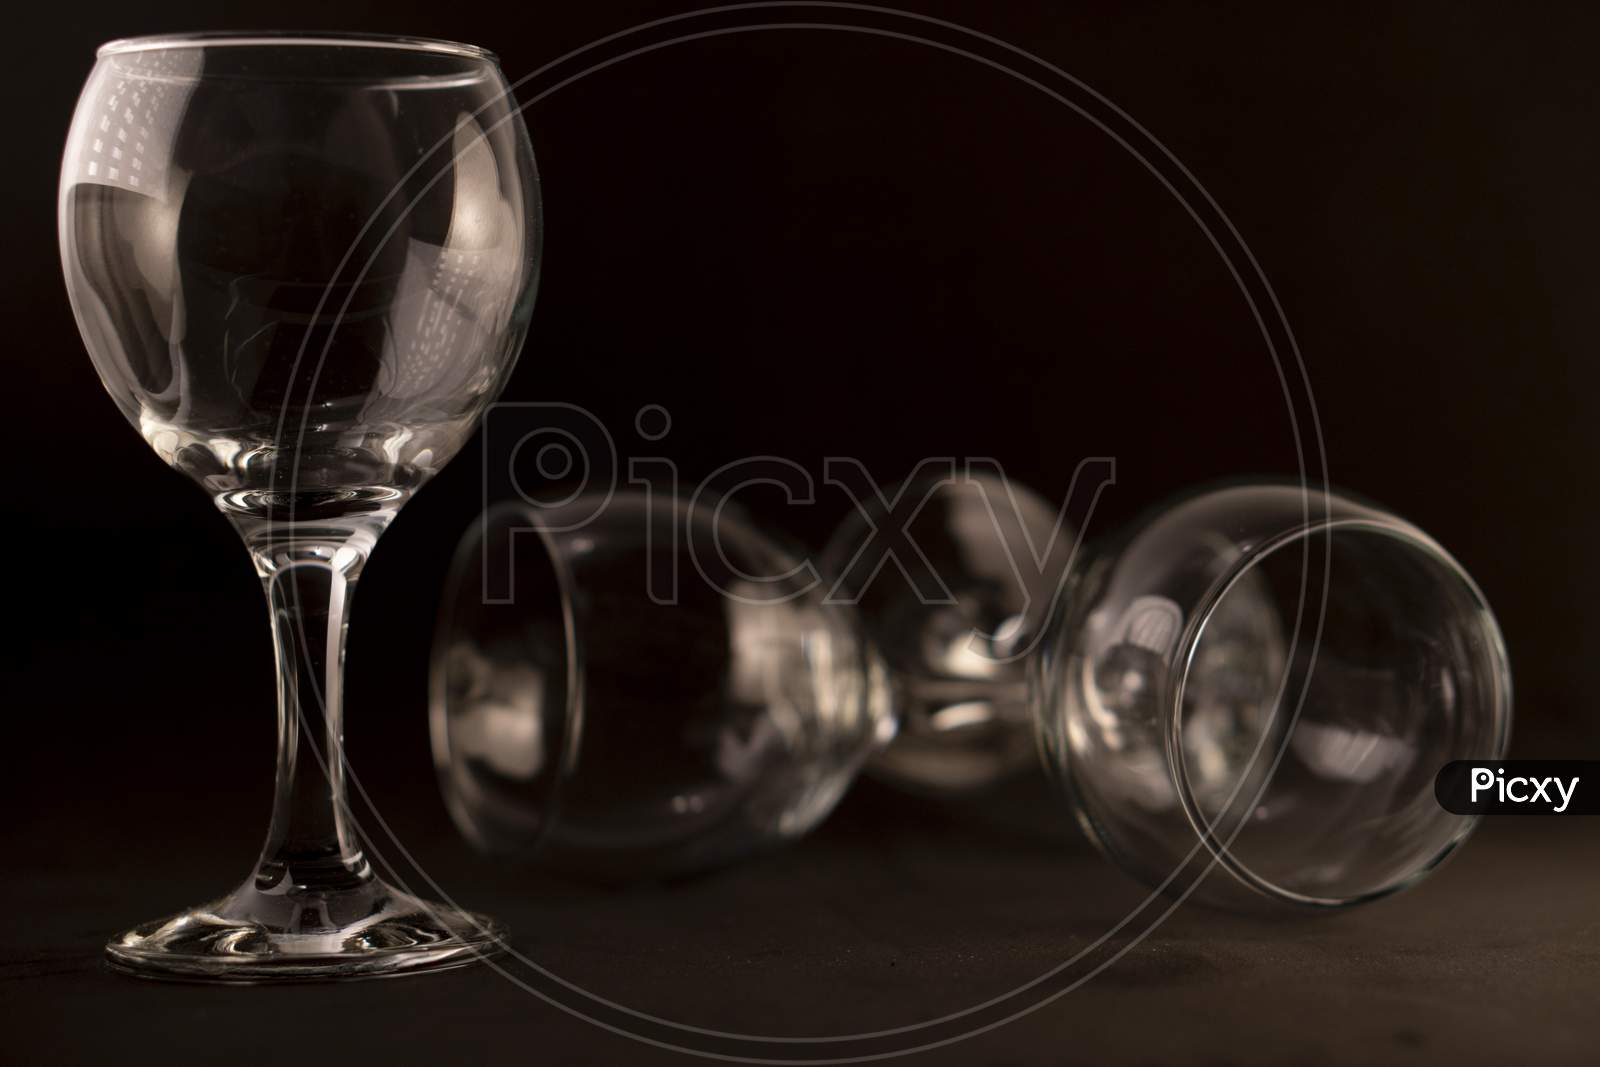 Picture of empty wine glasses against a black background